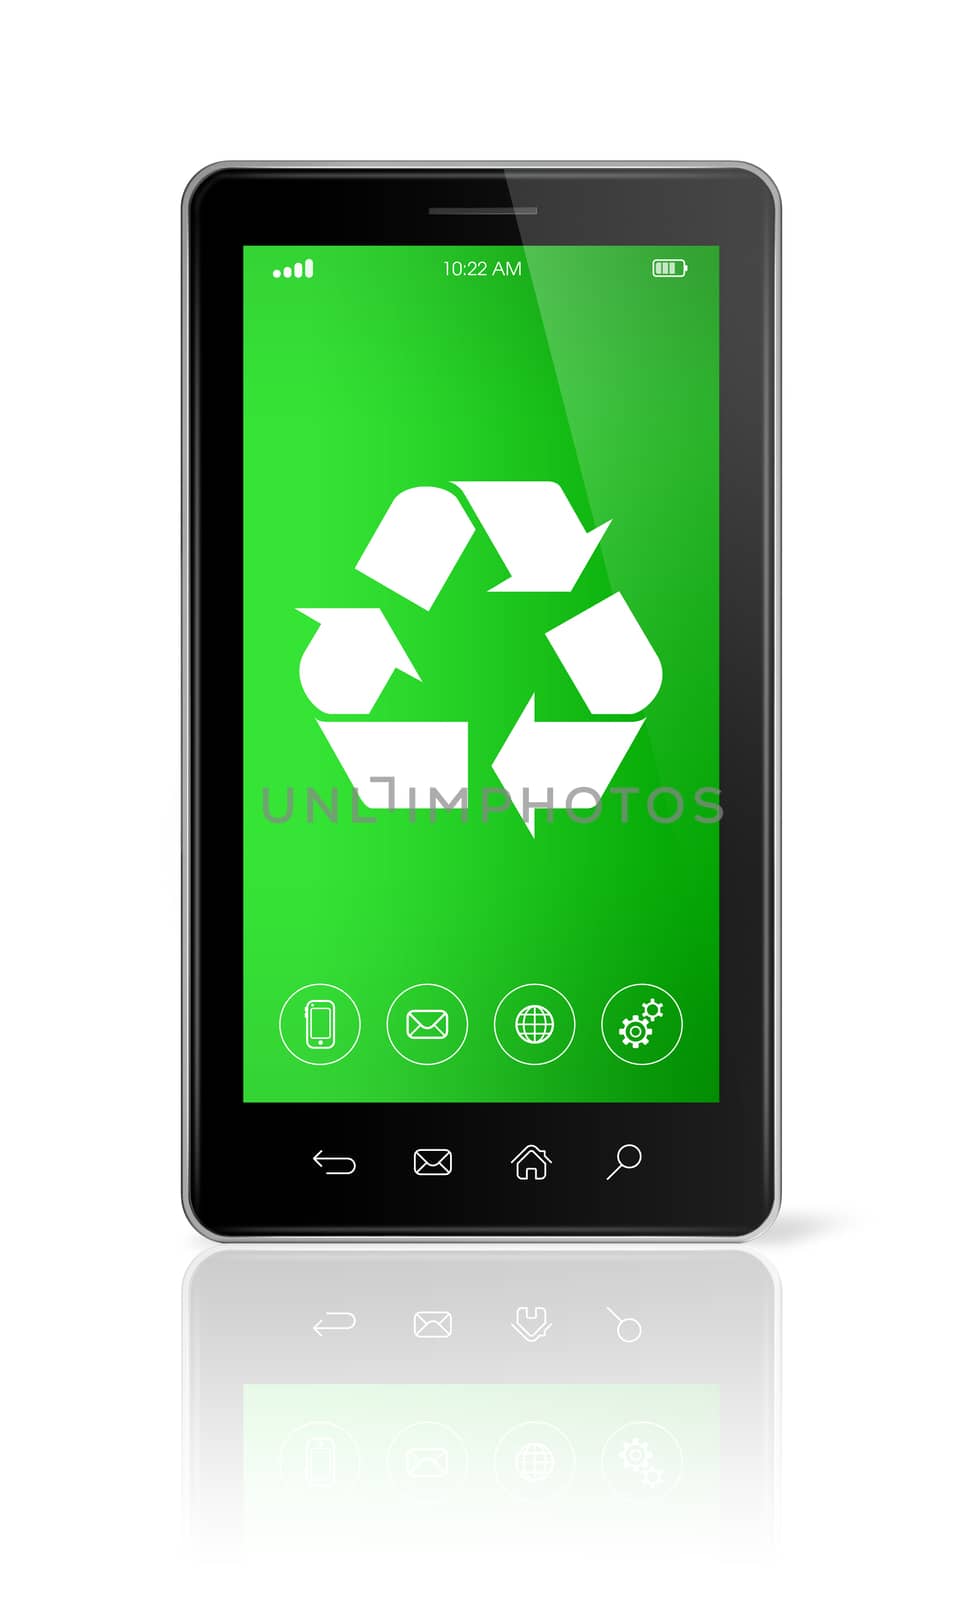 3D Smartphone with a recycling symbol on screen. environmental conservation concept